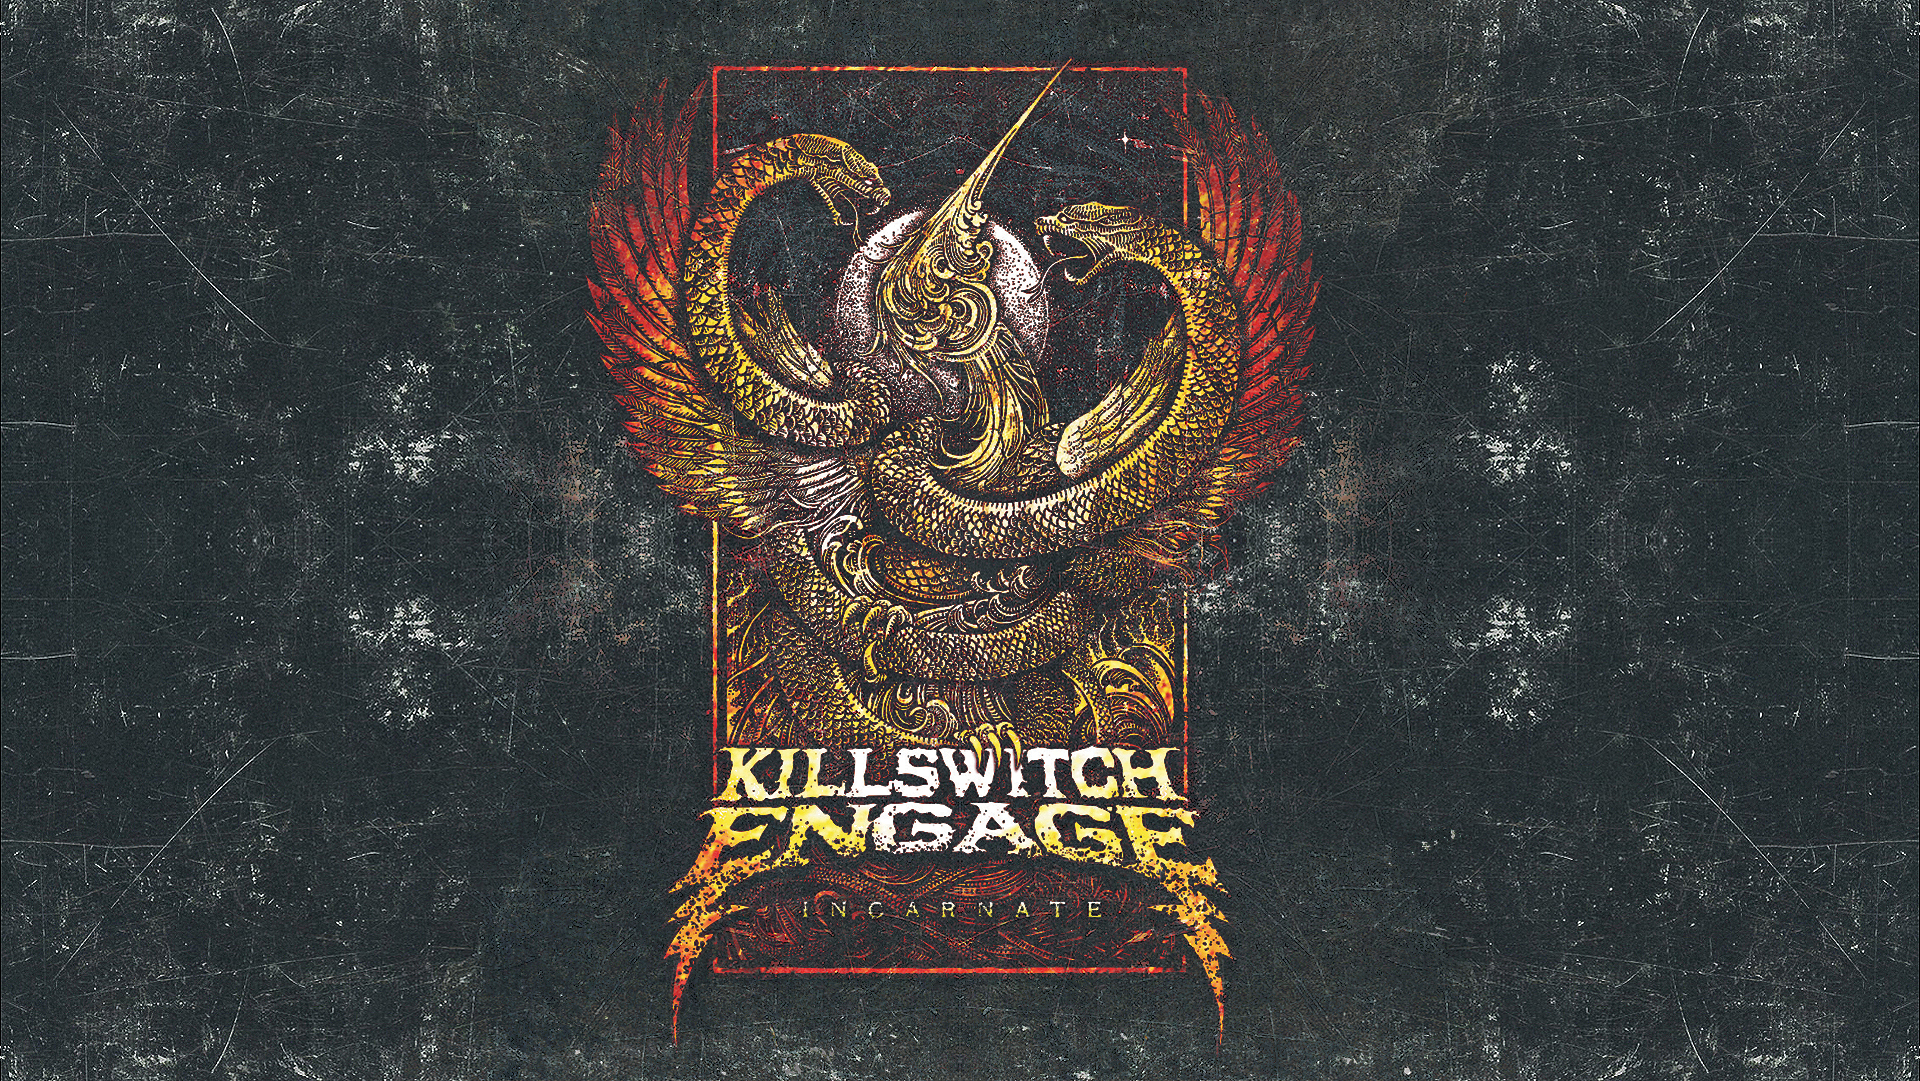 Killswitch Engage Wallpaper 2l677ig 4usky